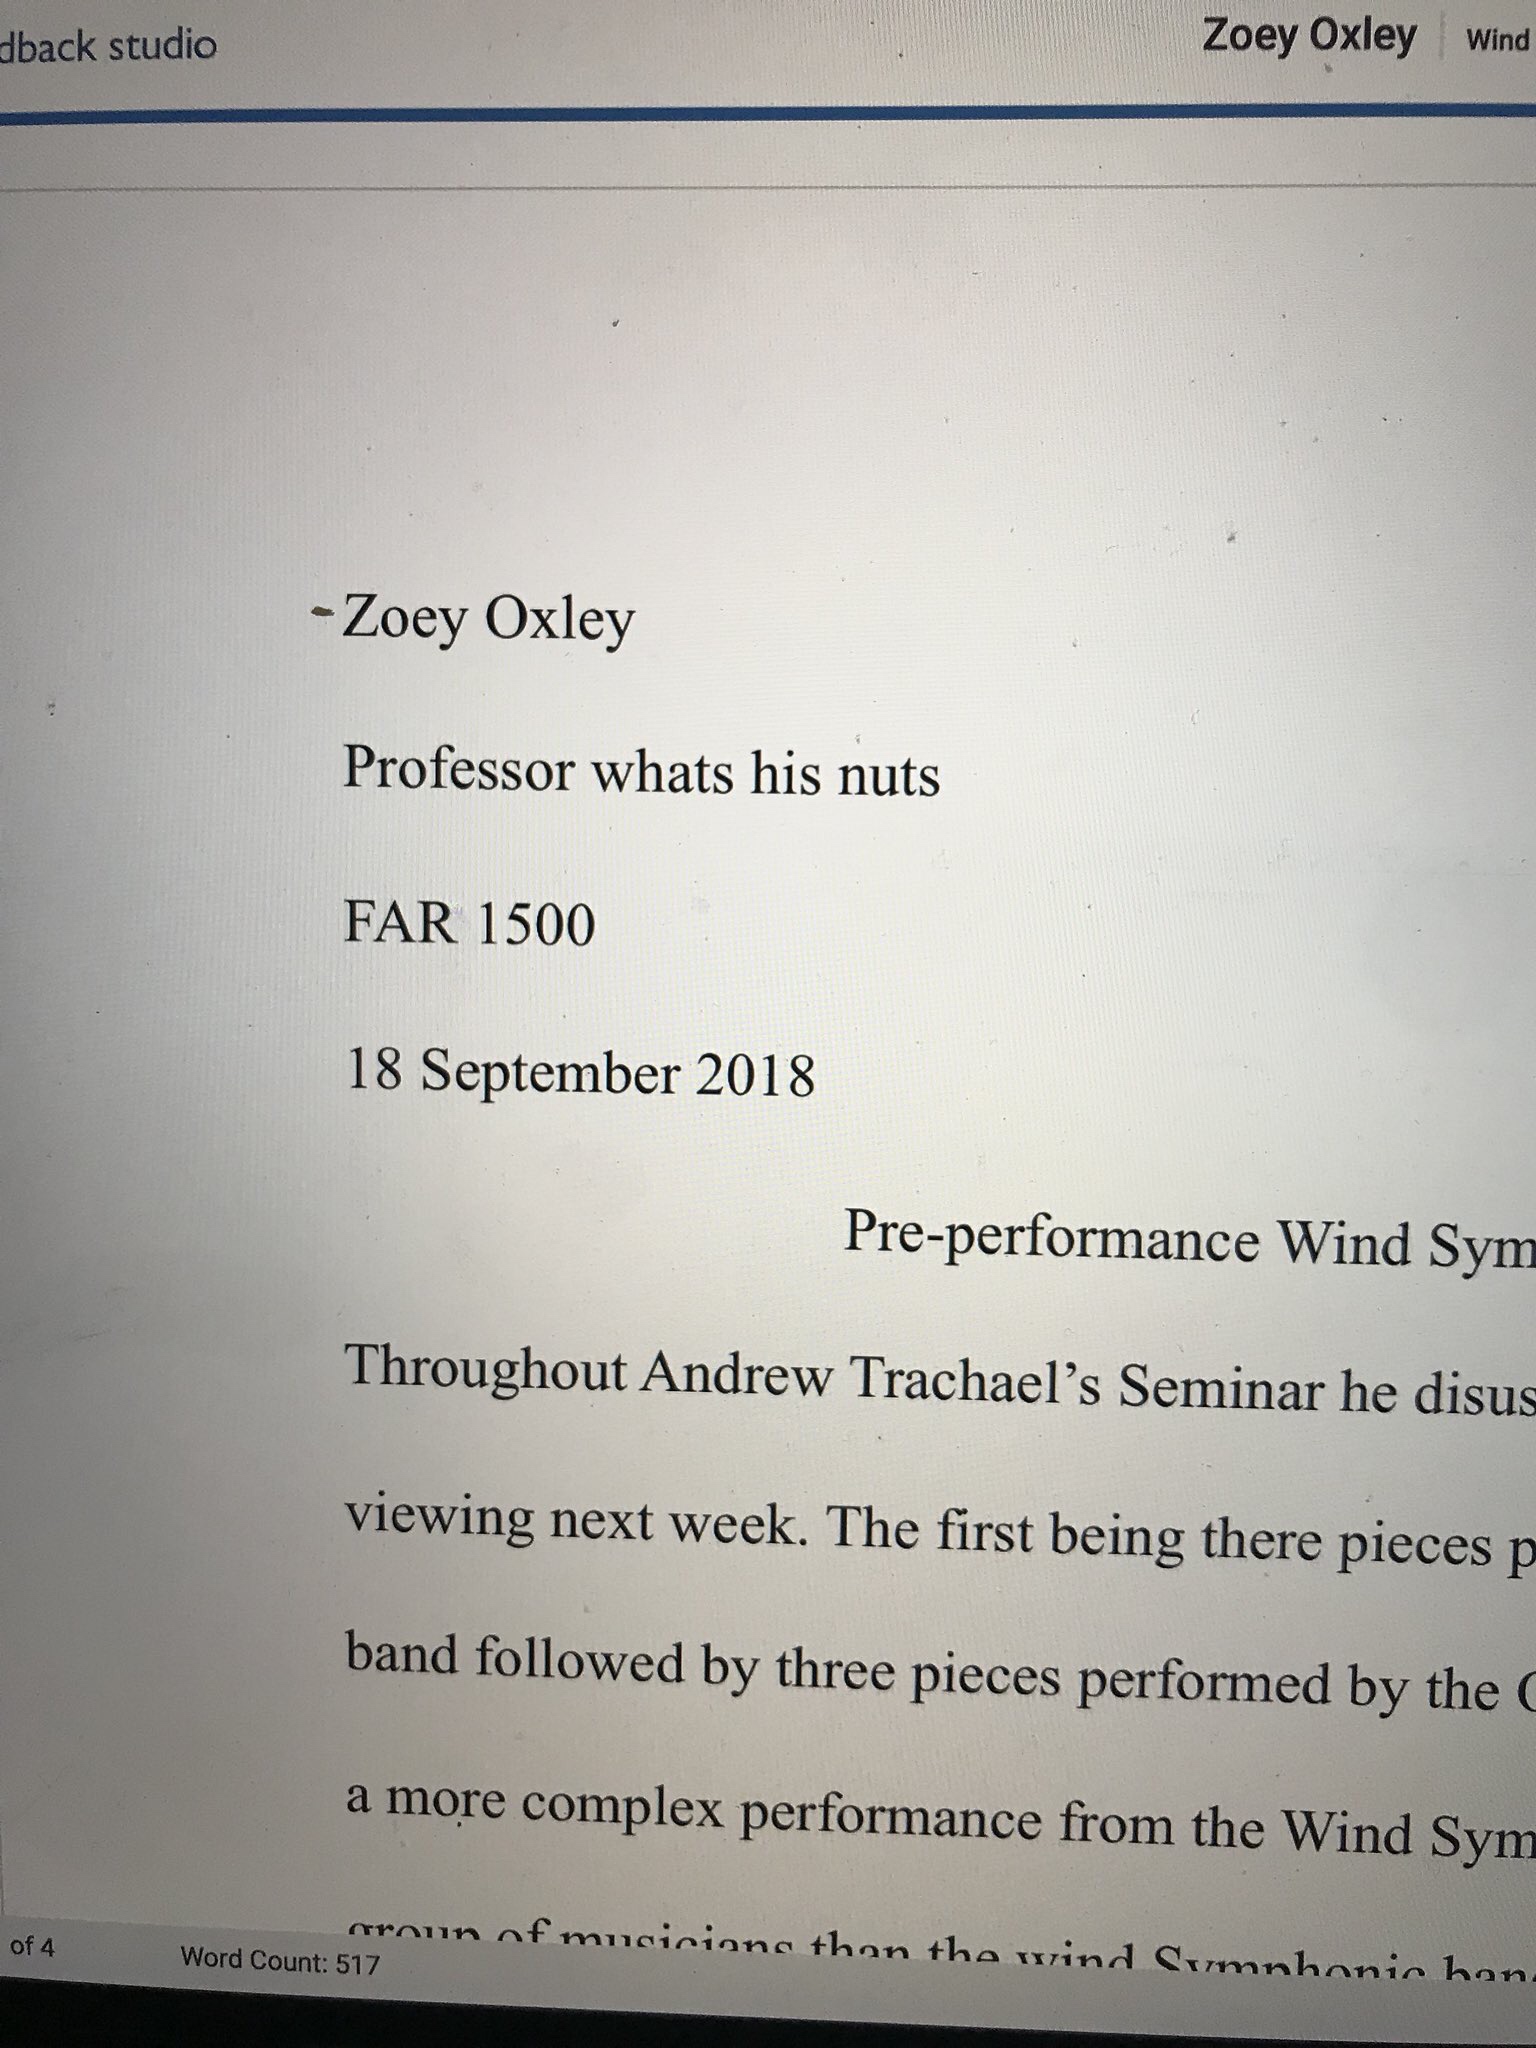 The student’s paper